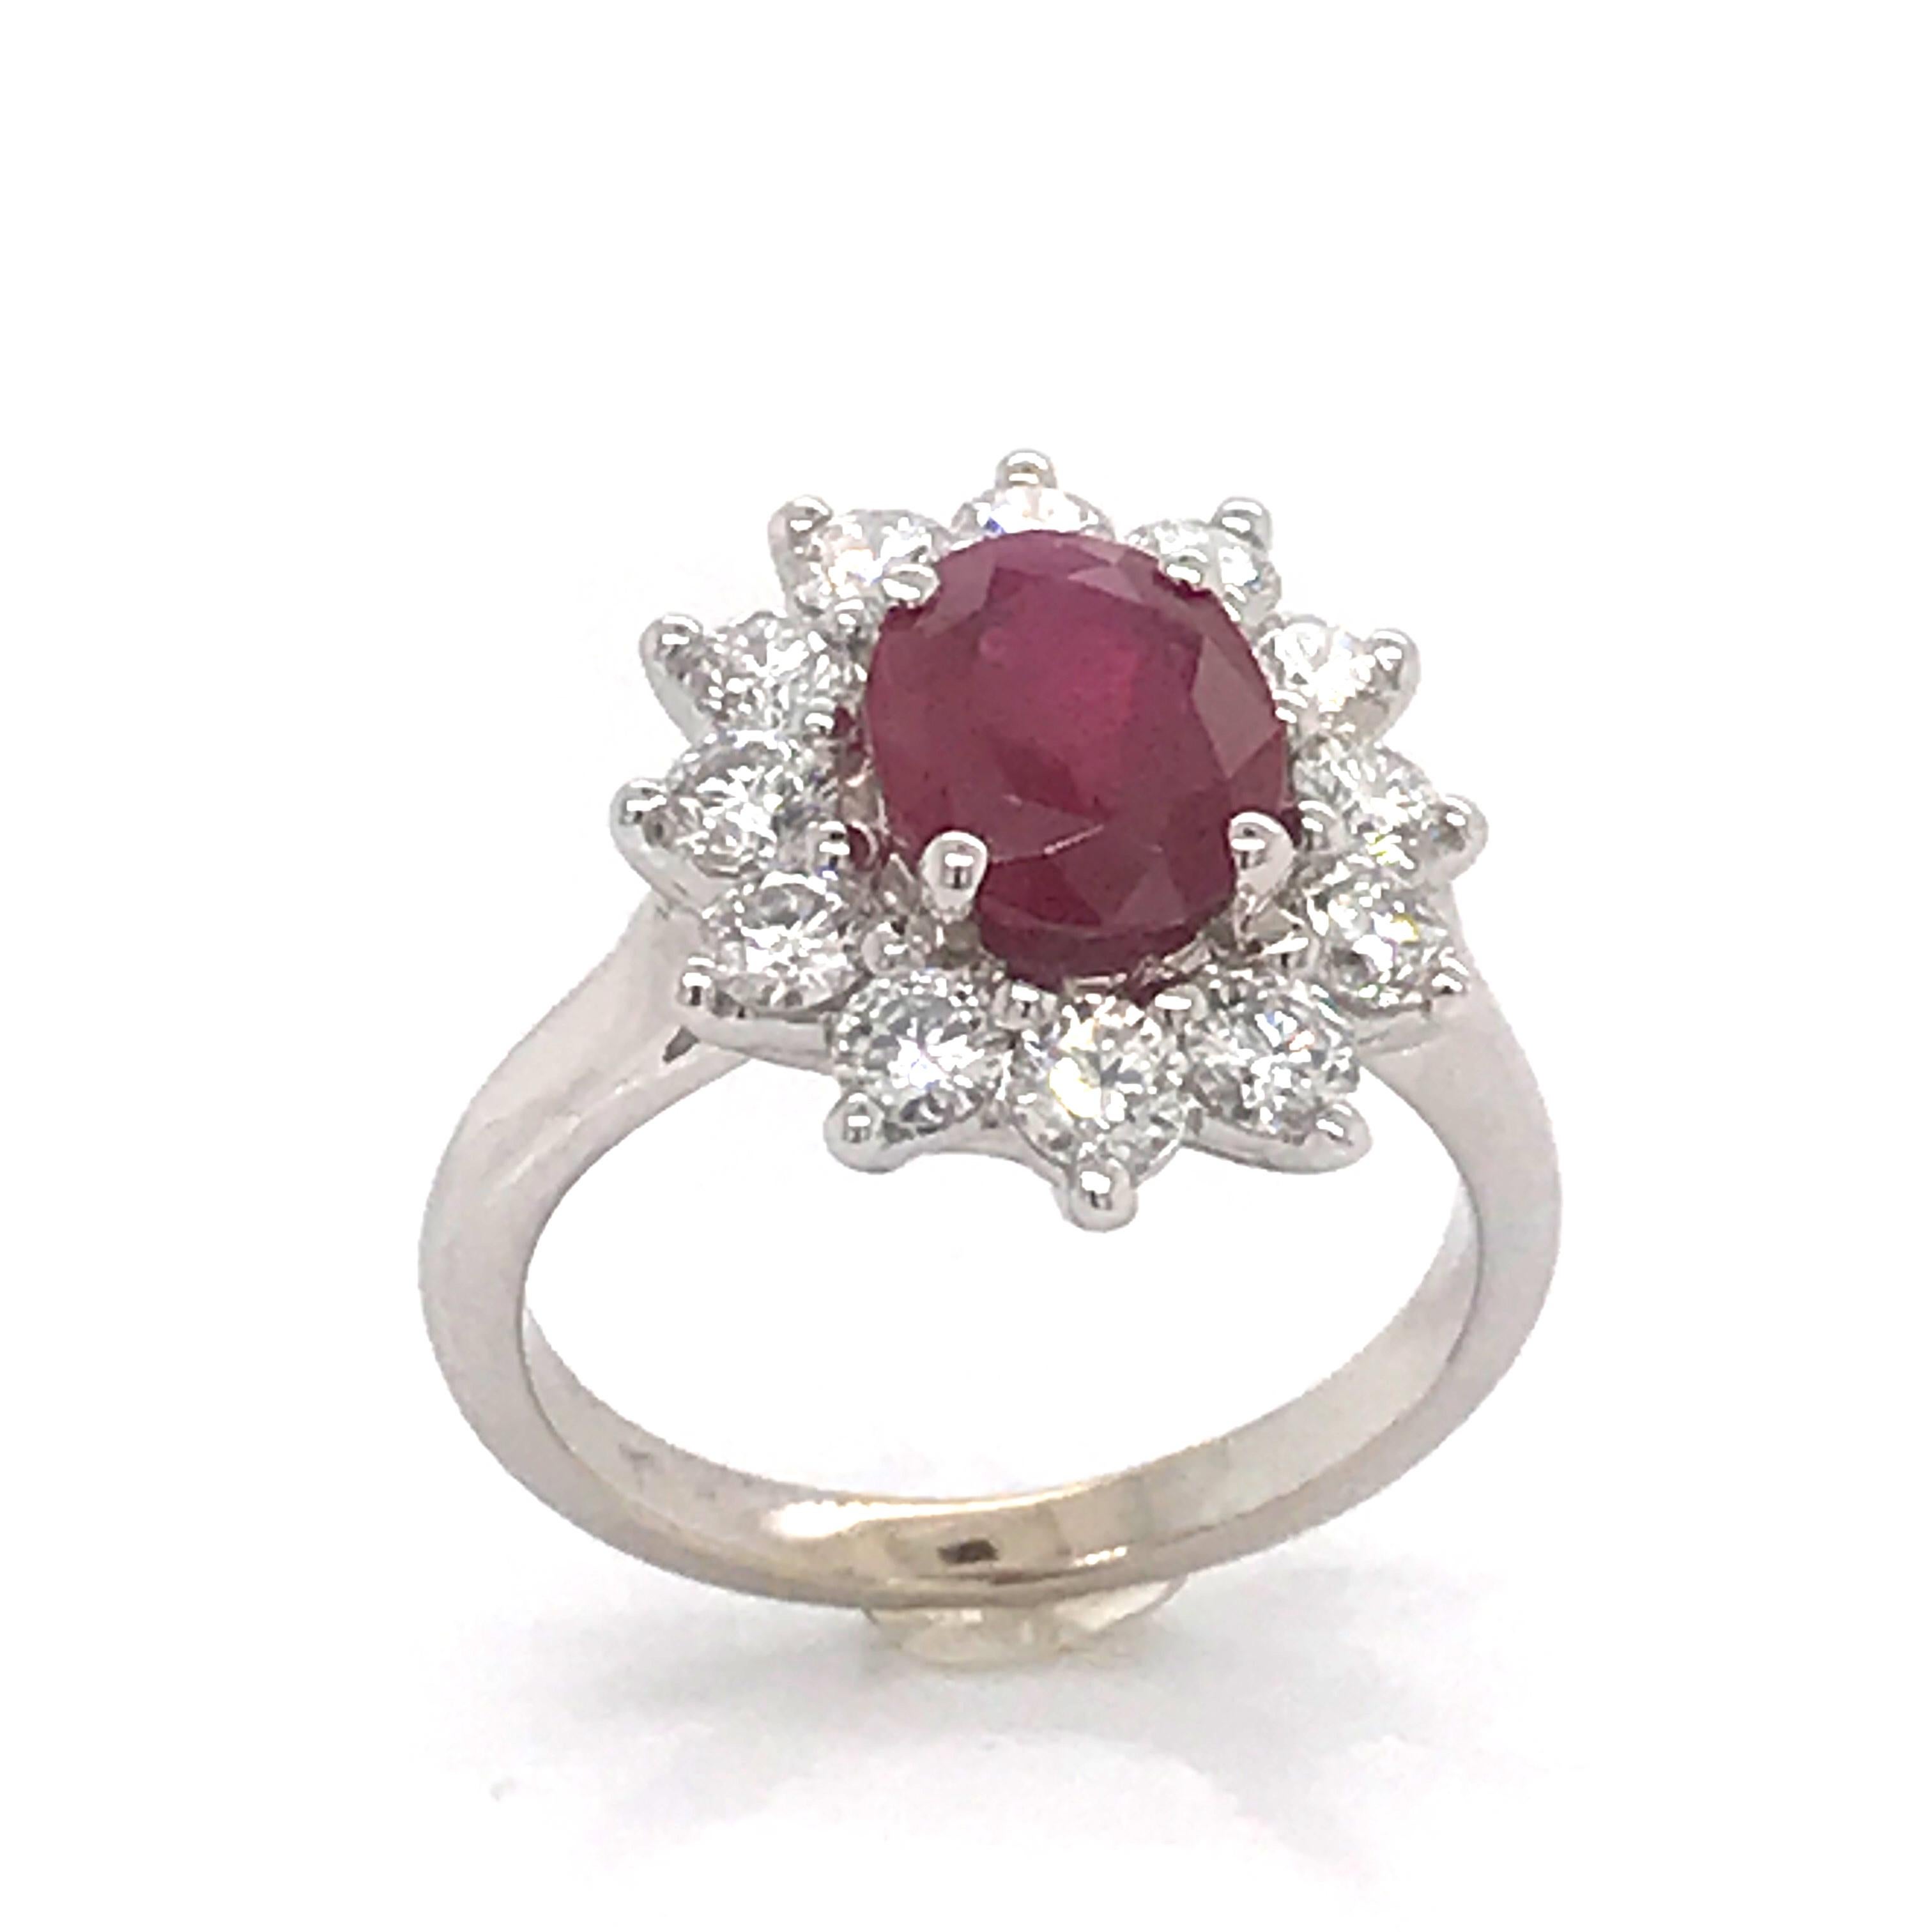 Introduce a touch of timeless beauty and dazzling sparkle to your marriage proposal with this magnificent 18-carat white gold engagement ring. Showcasing a 2.06 carat oval ruby, carefully selected for its vibrant colour and crystal clarity, this